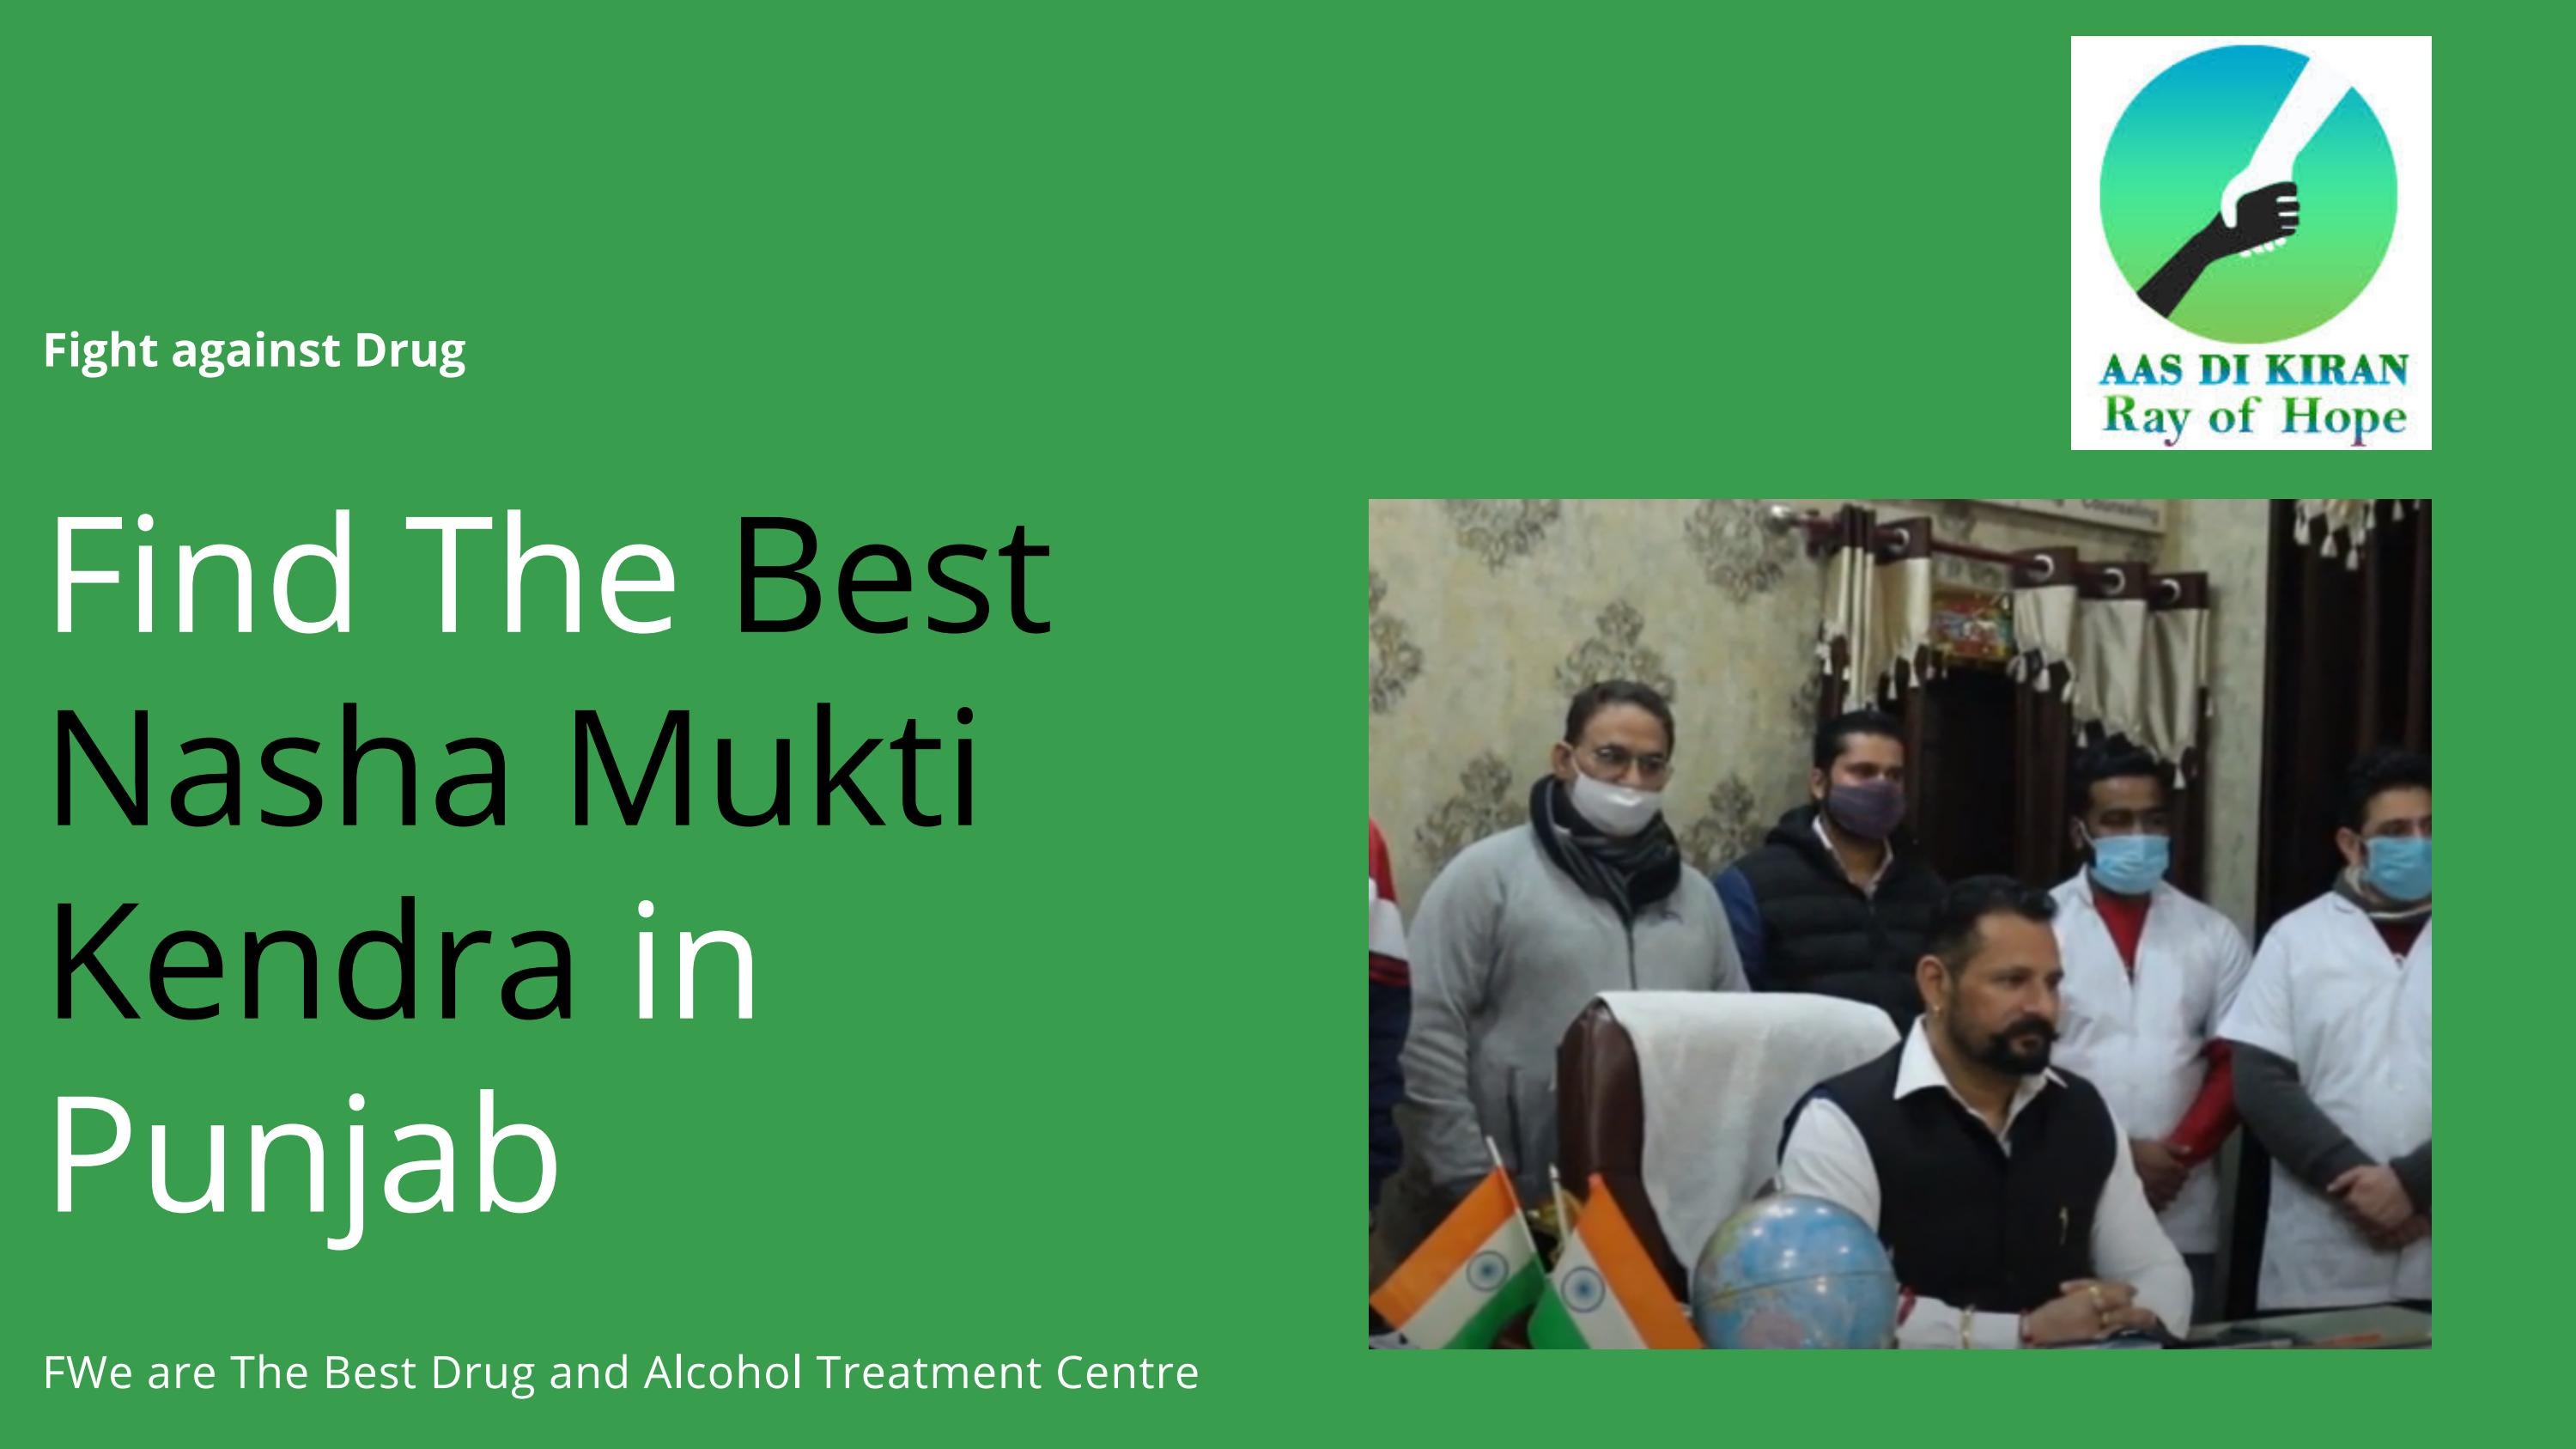 Find The Best Nasha Mukti Kendra in Punjab for Addiction Treatment